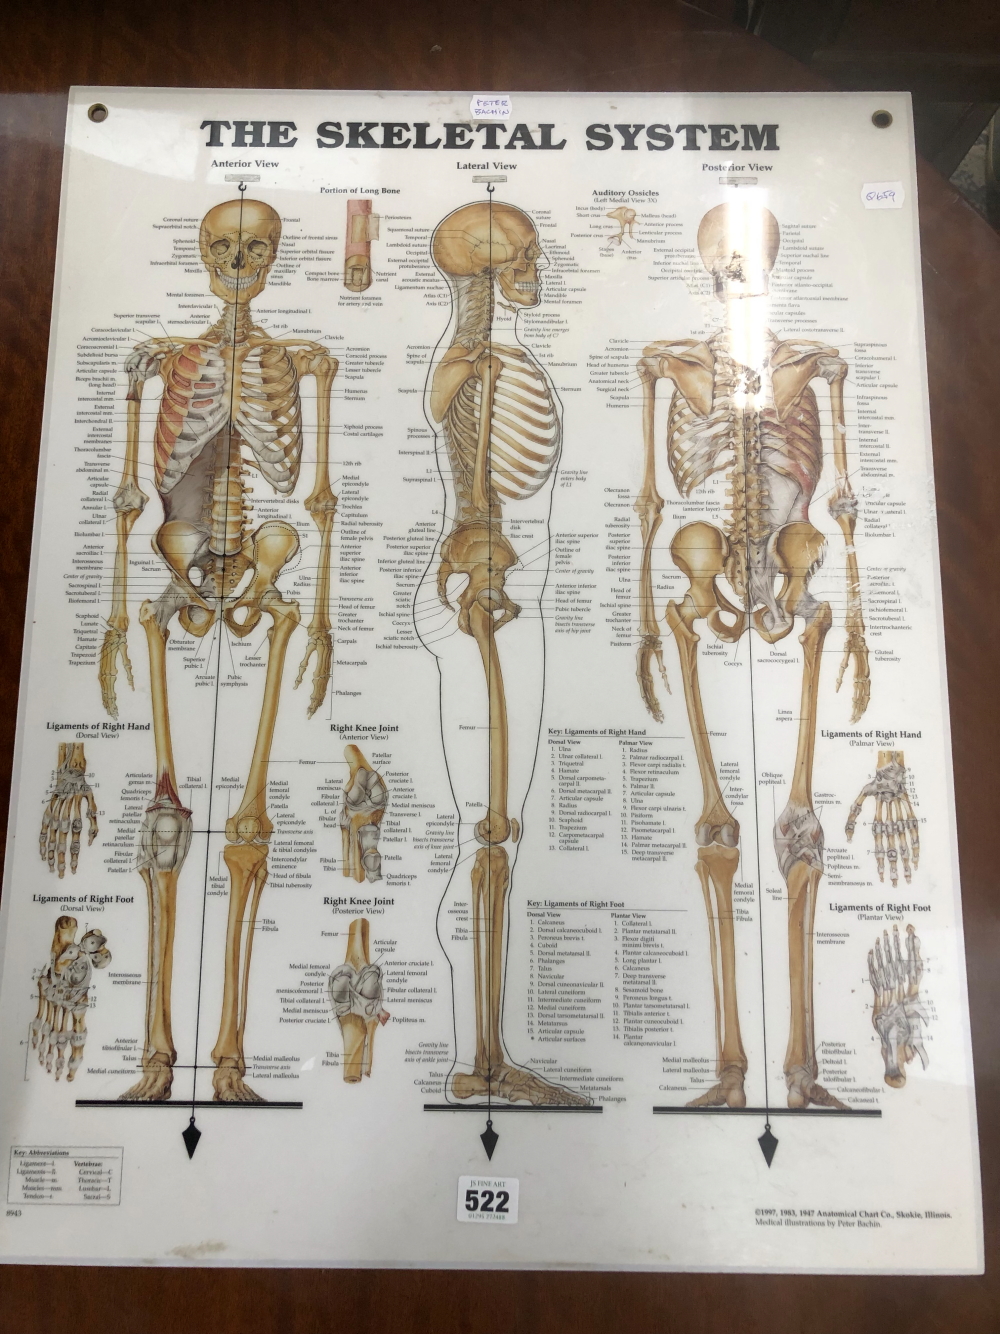 AN ANATOMICAL SKELETAL SYSTEM CHART.